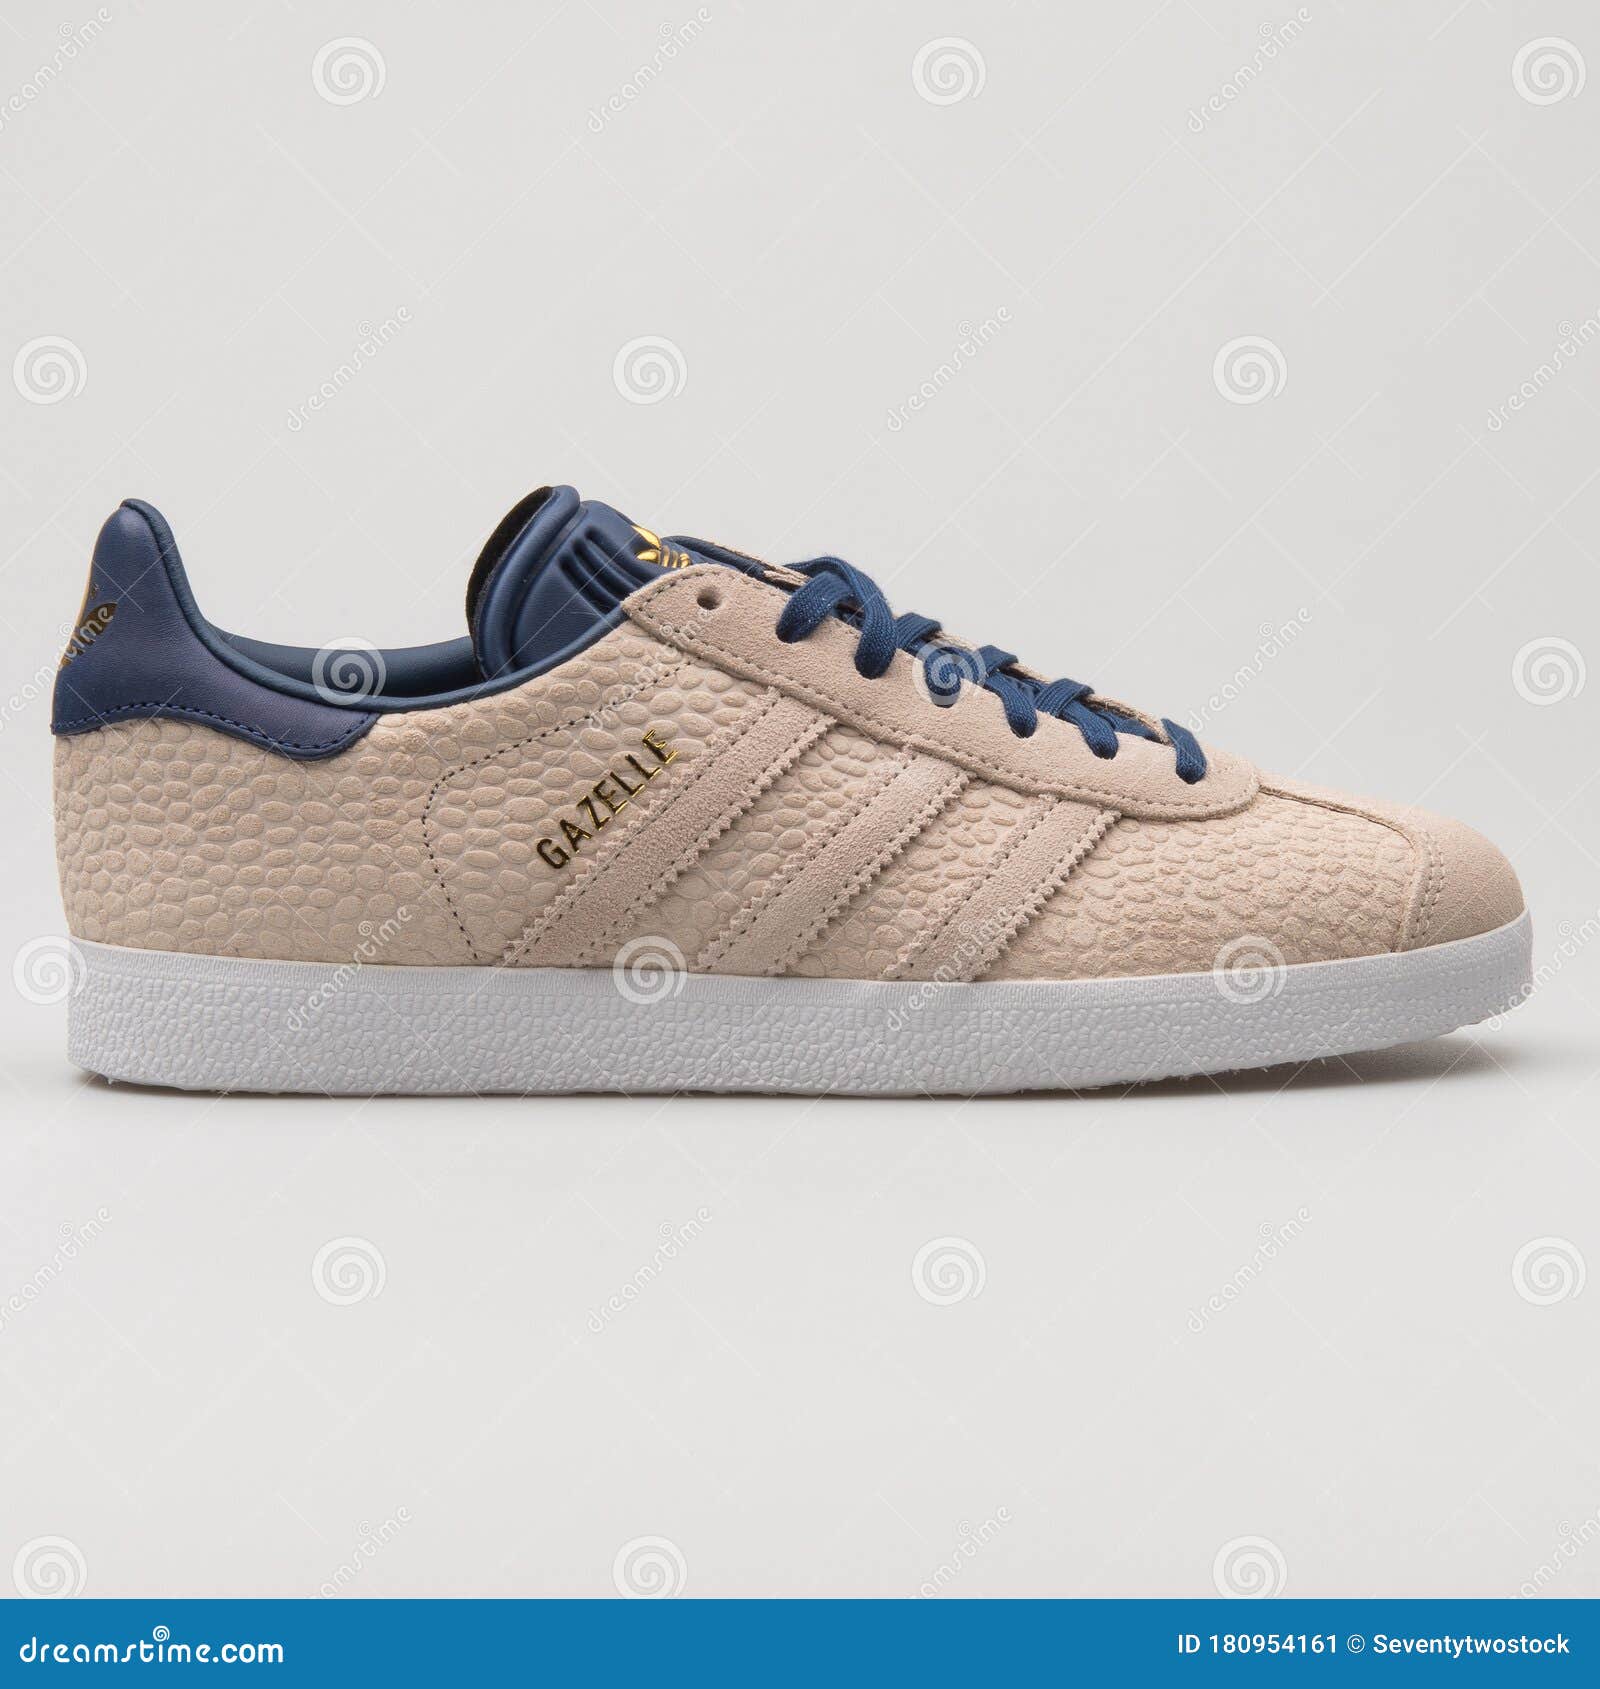 Adidas Gazelle Beige and Navy Blue Sneaker Editorial Photo - Image ...